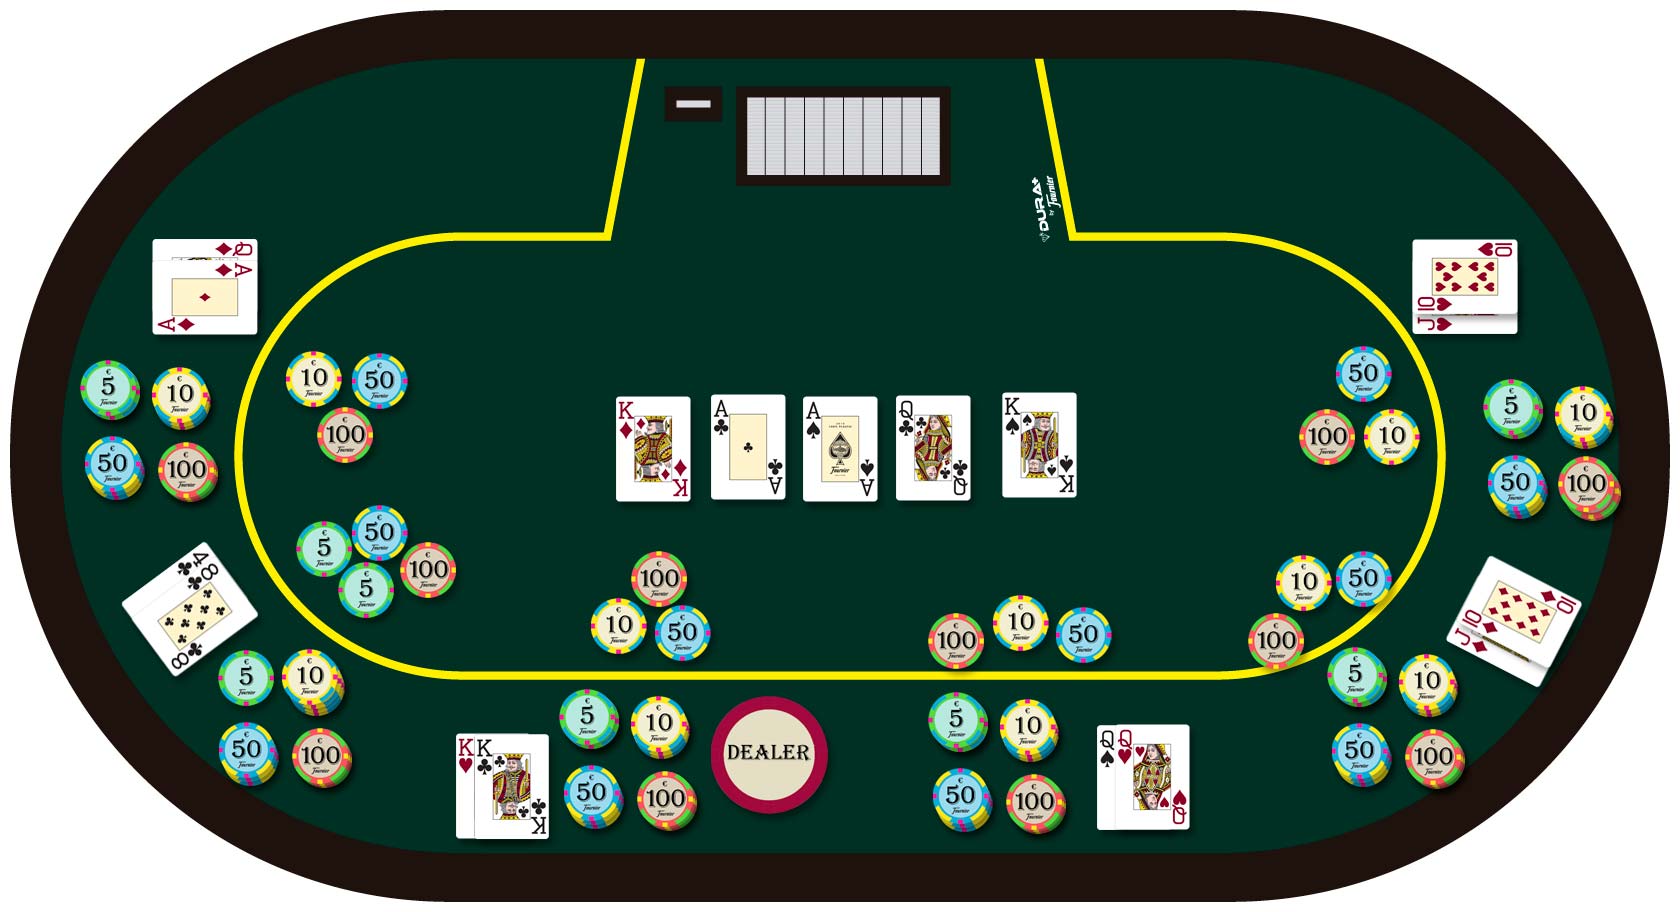 How to Play & Bet Texas Hold 'em Poker: Basic Rules